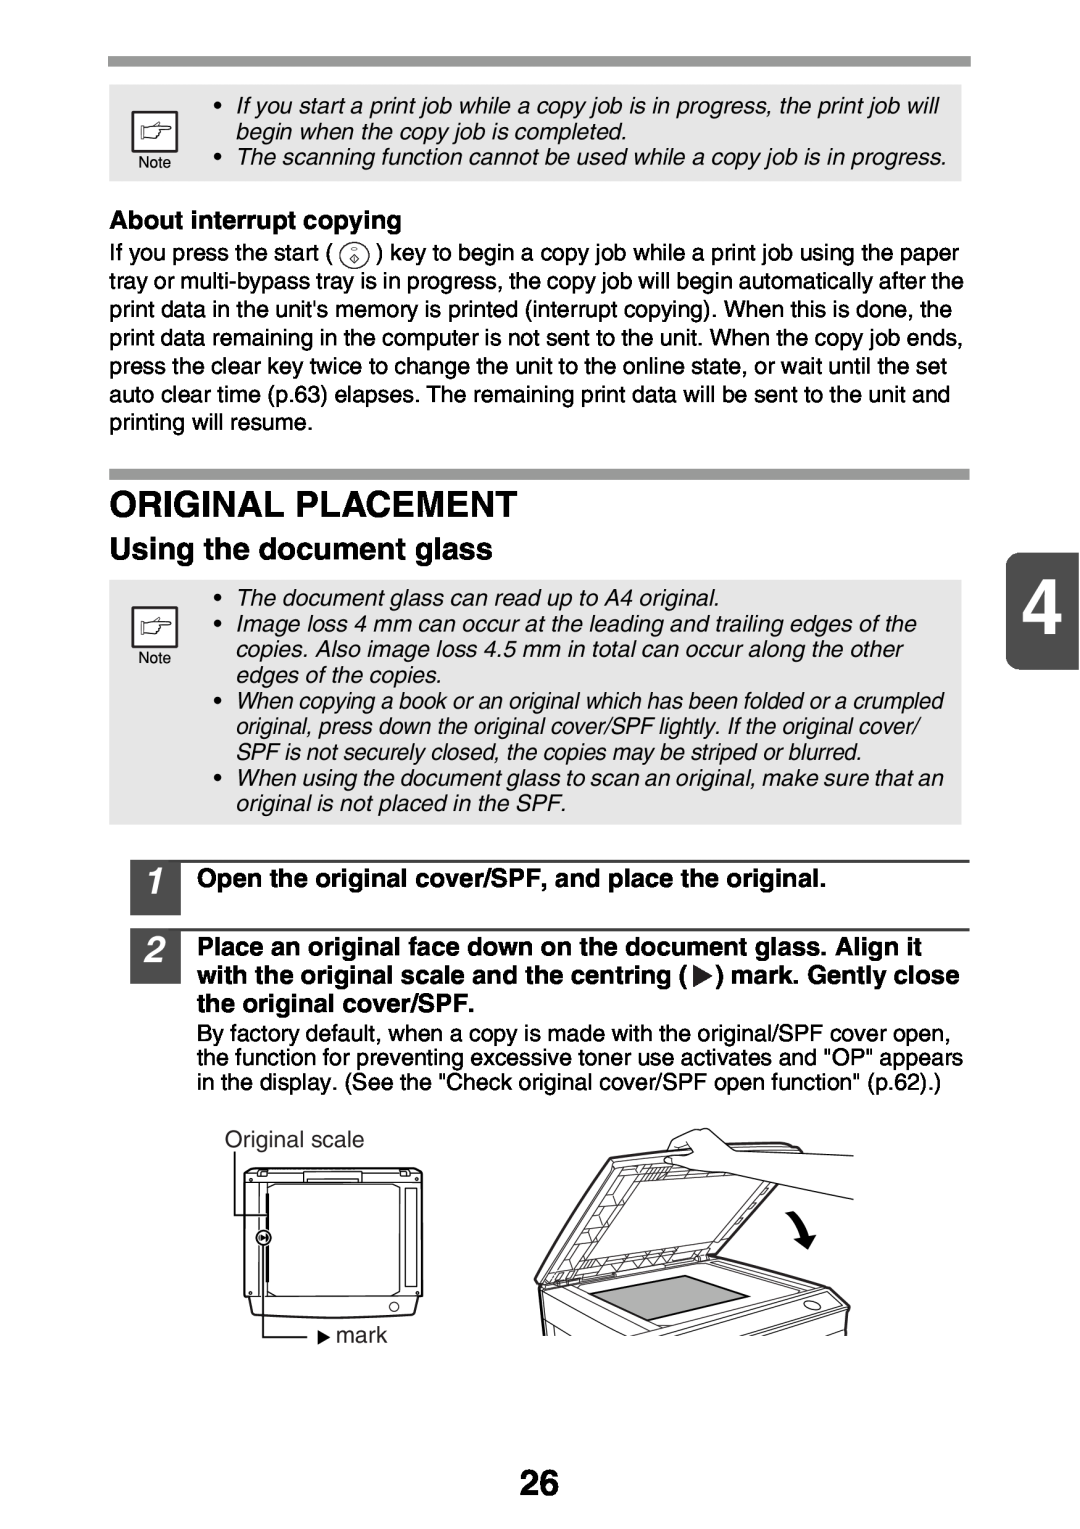 Sharp MX-B200 manual Original Placement, Using the document glass, About interrupt copying 